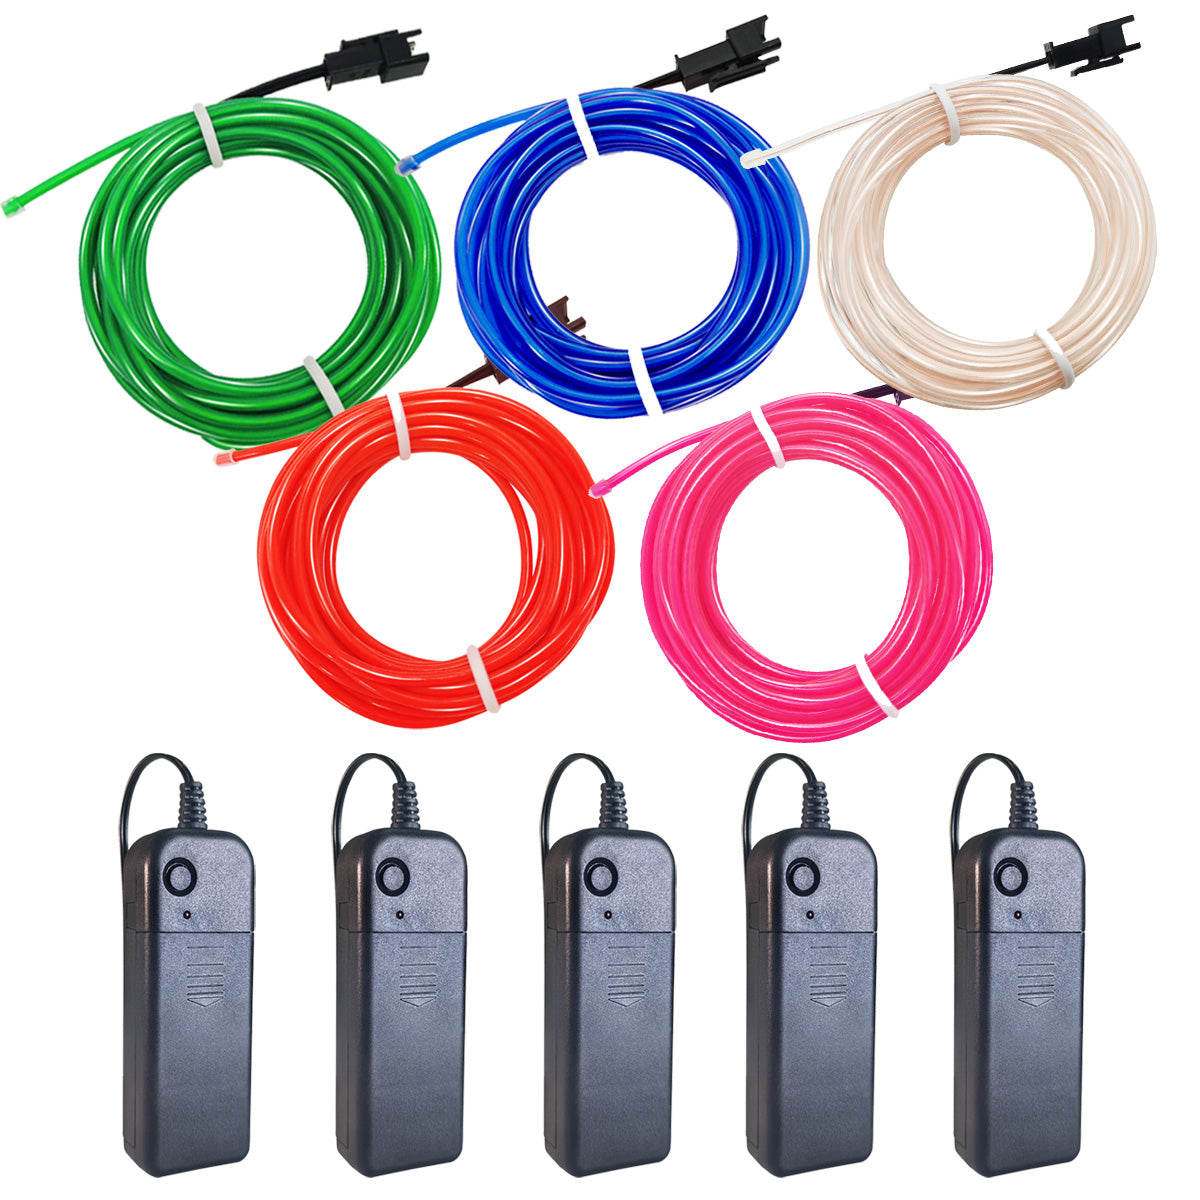 EL Wire Portable 5 Set (Green, Blue, Red, White, Pink)50% Discount if you  use discount code – maxlaxer